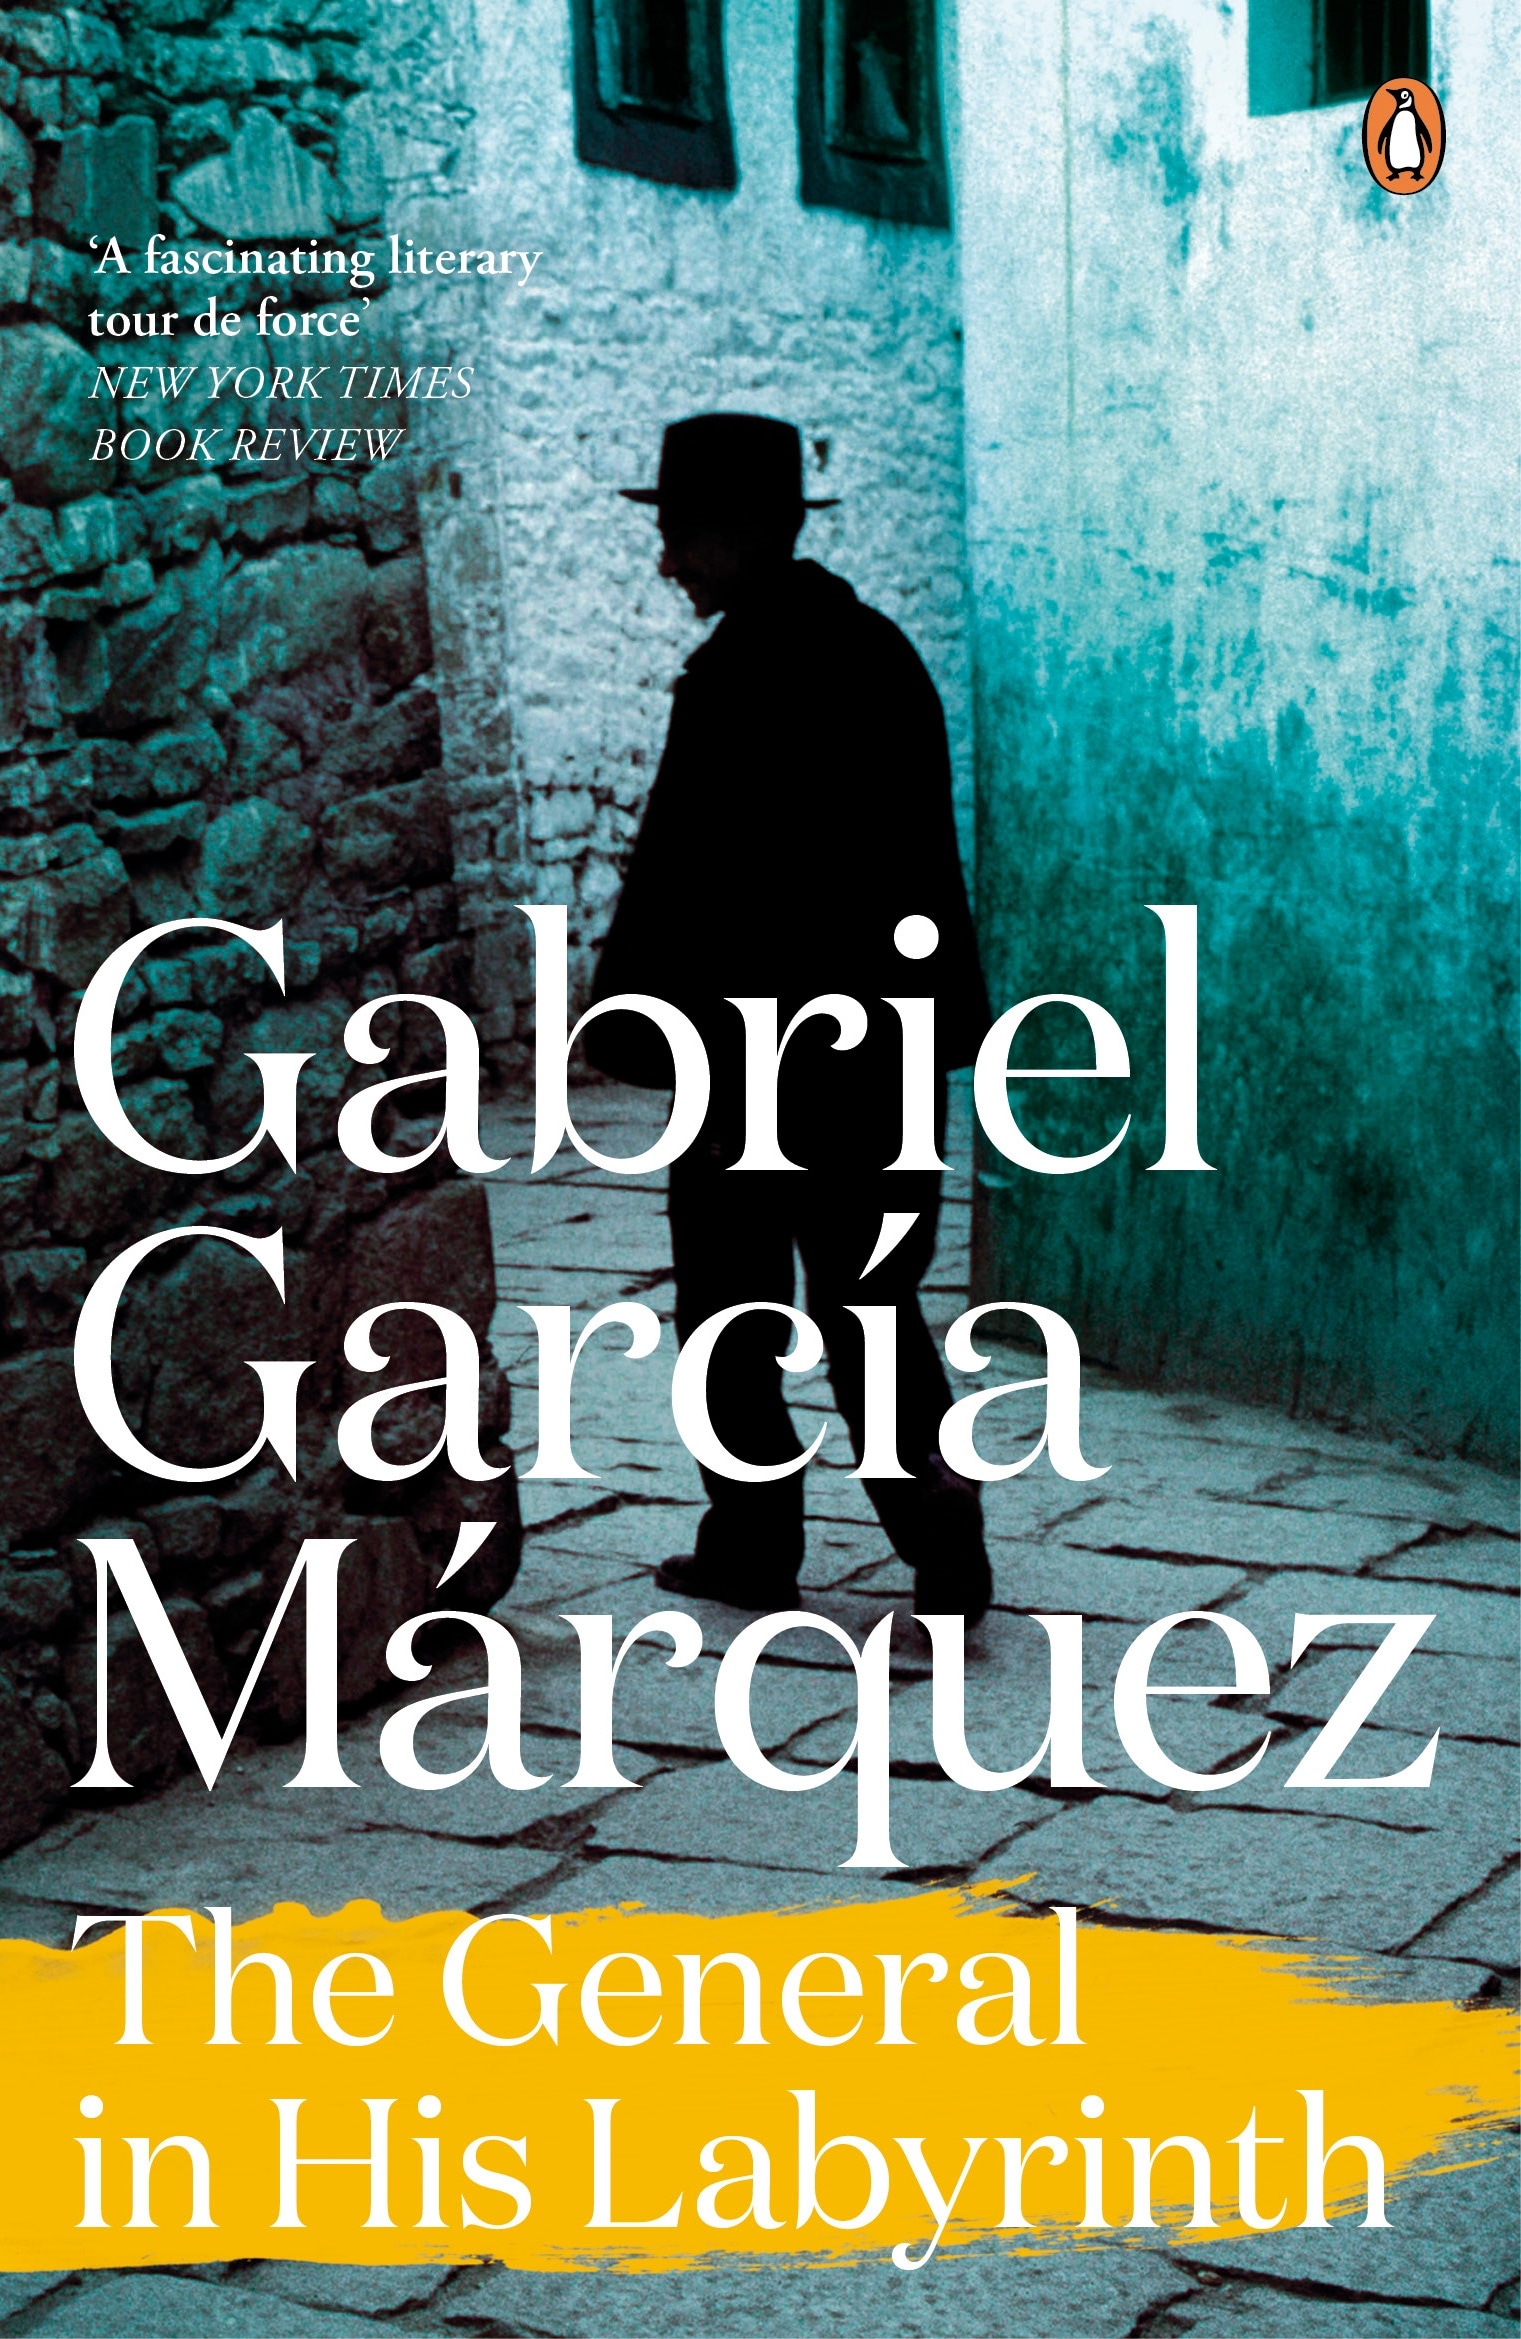 Book “The General in His Labyrinth” by Gabriel Garcia Marquez — March 6, 2014